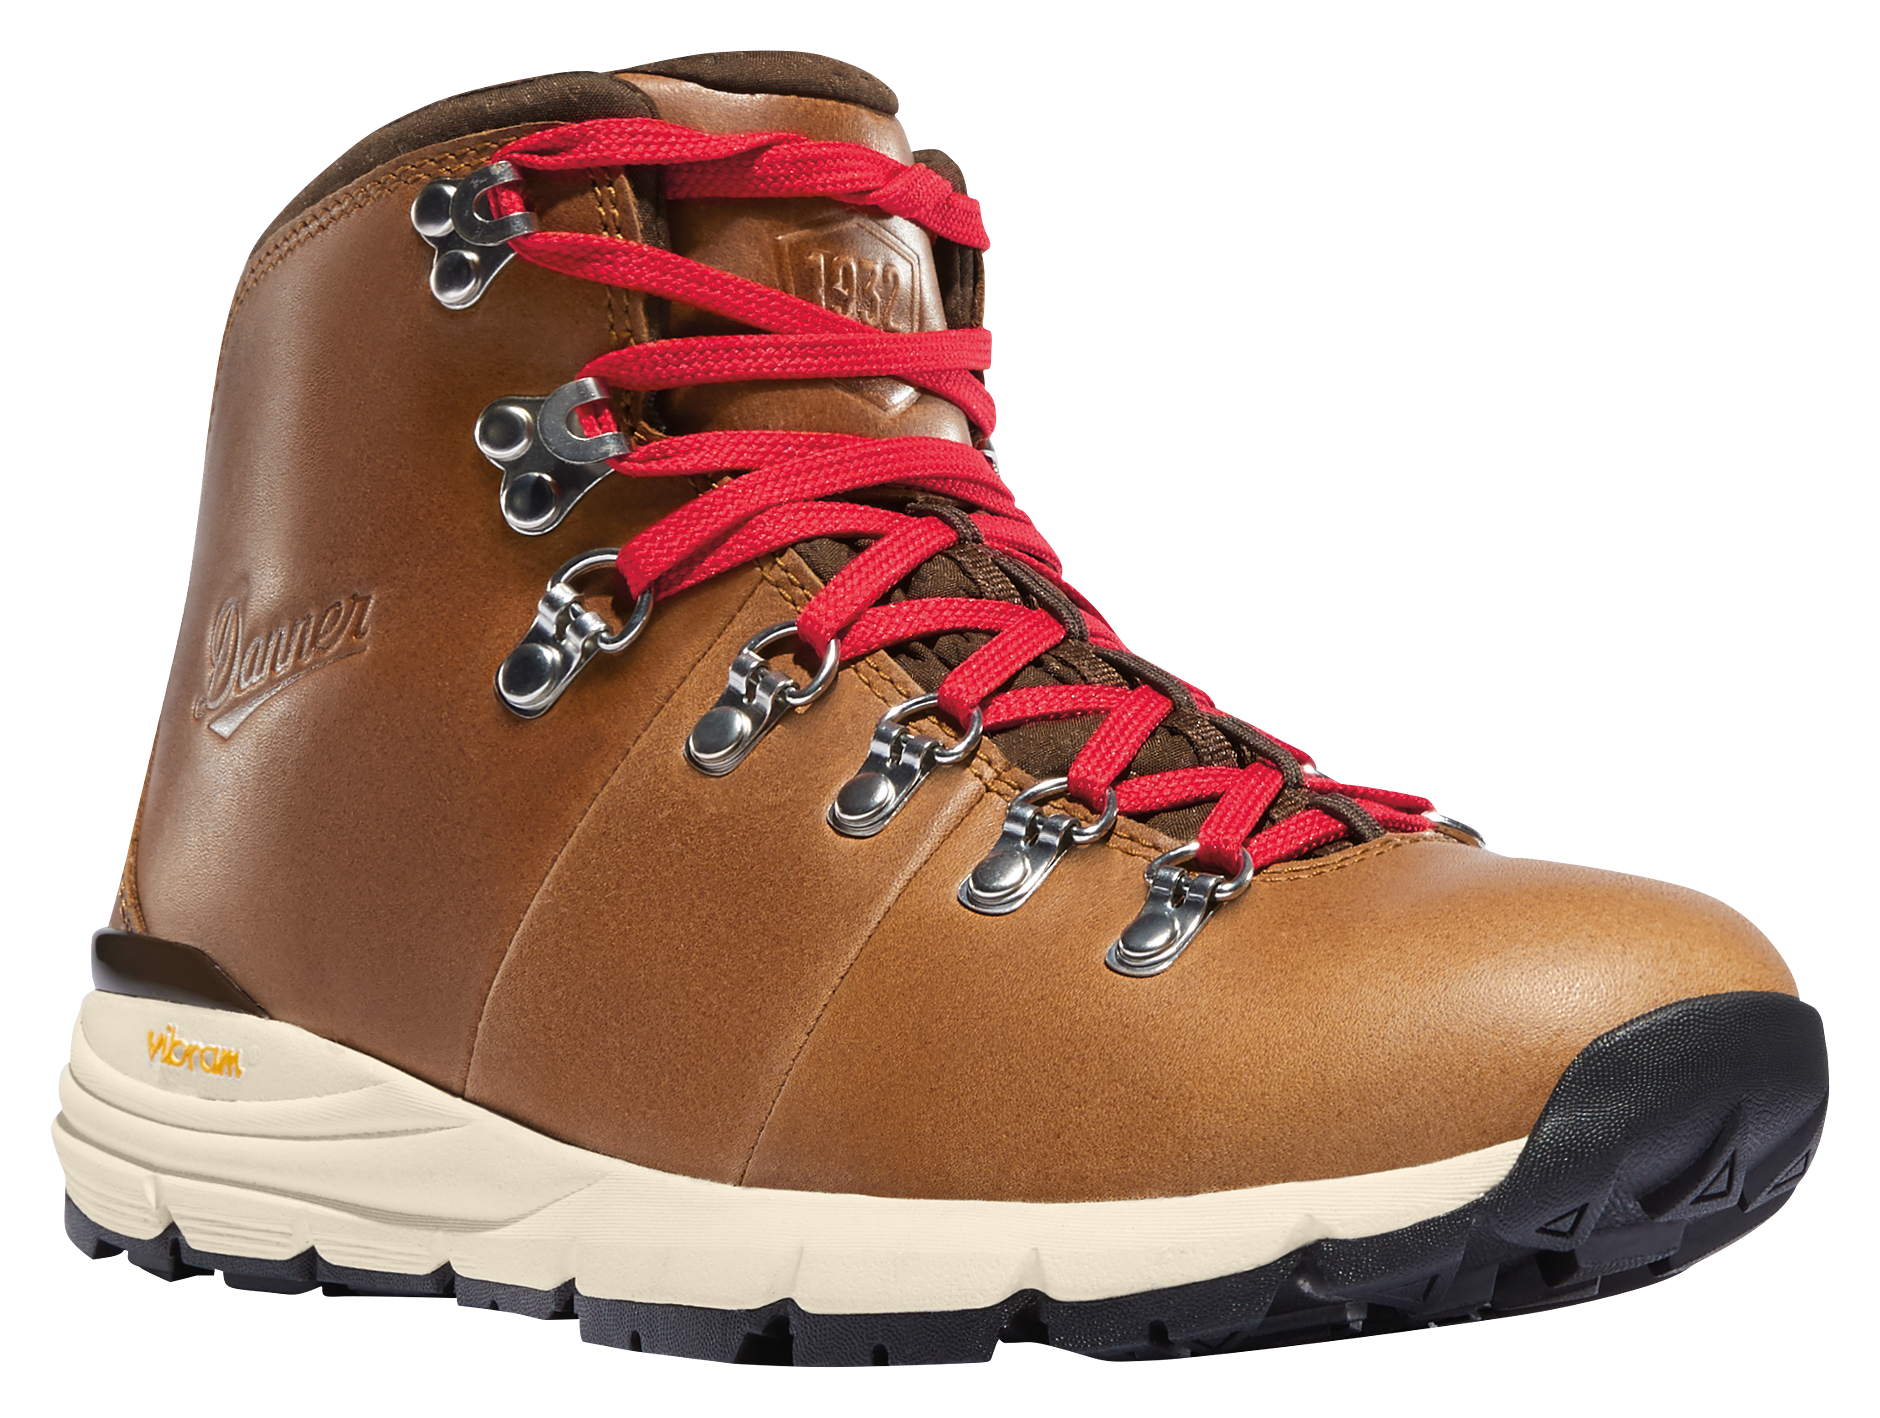 Danner Mountain 600 Leather Waterproof Hiking Boots for Ladies - Saddle Tan - 7M